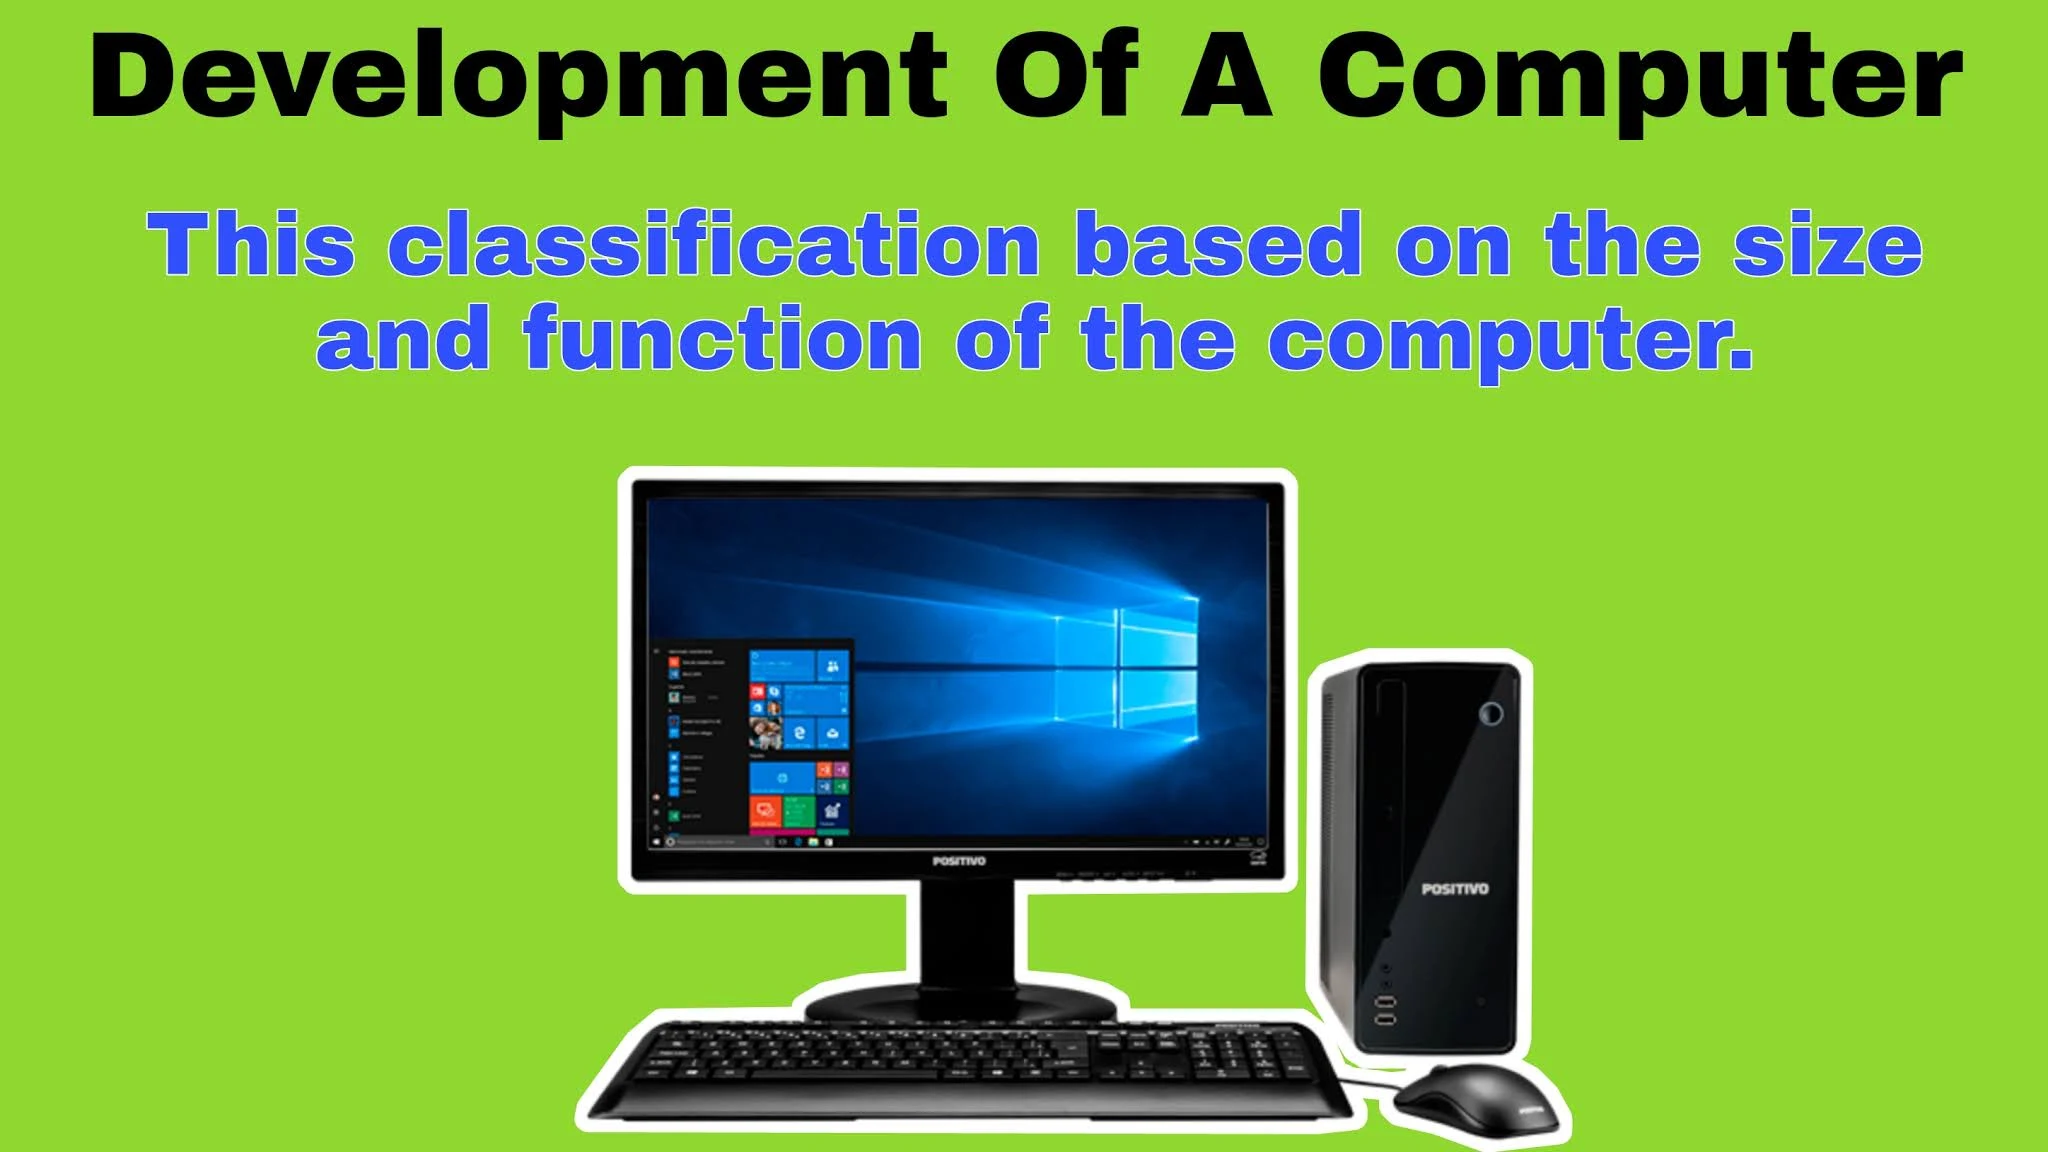 Classification of computer development based on size and function